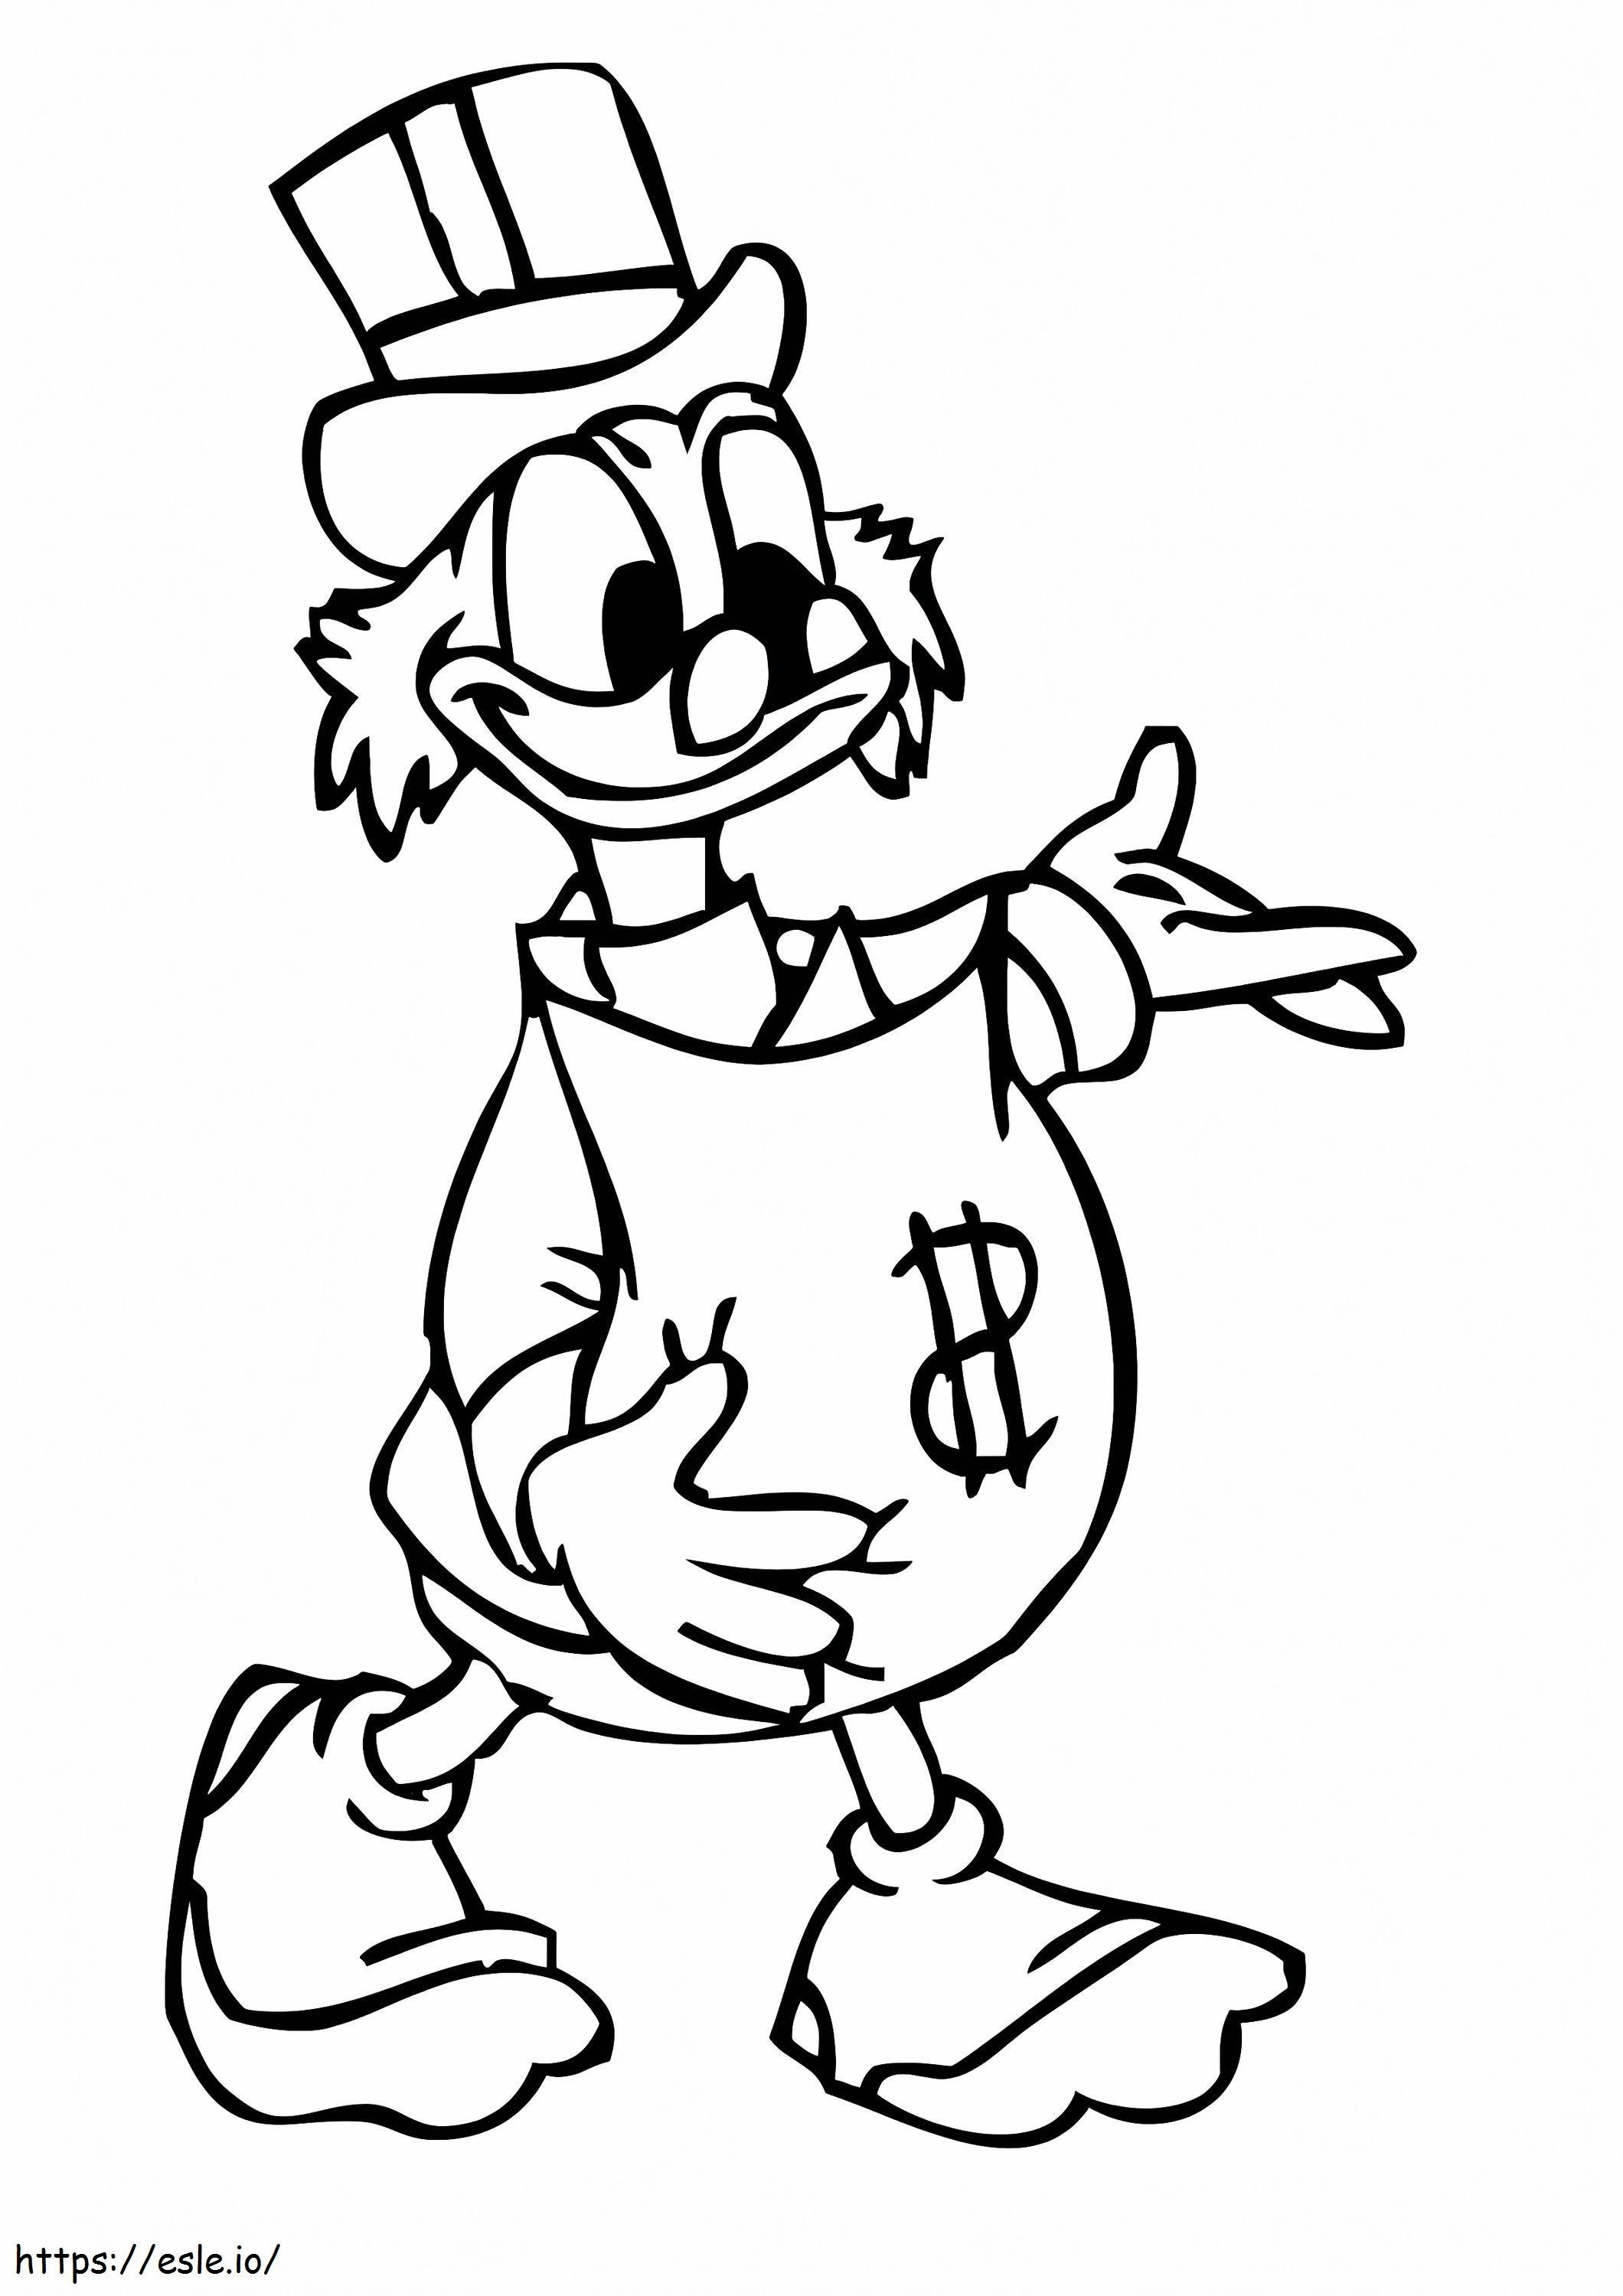 Scrooge McDuck And Money coloring page